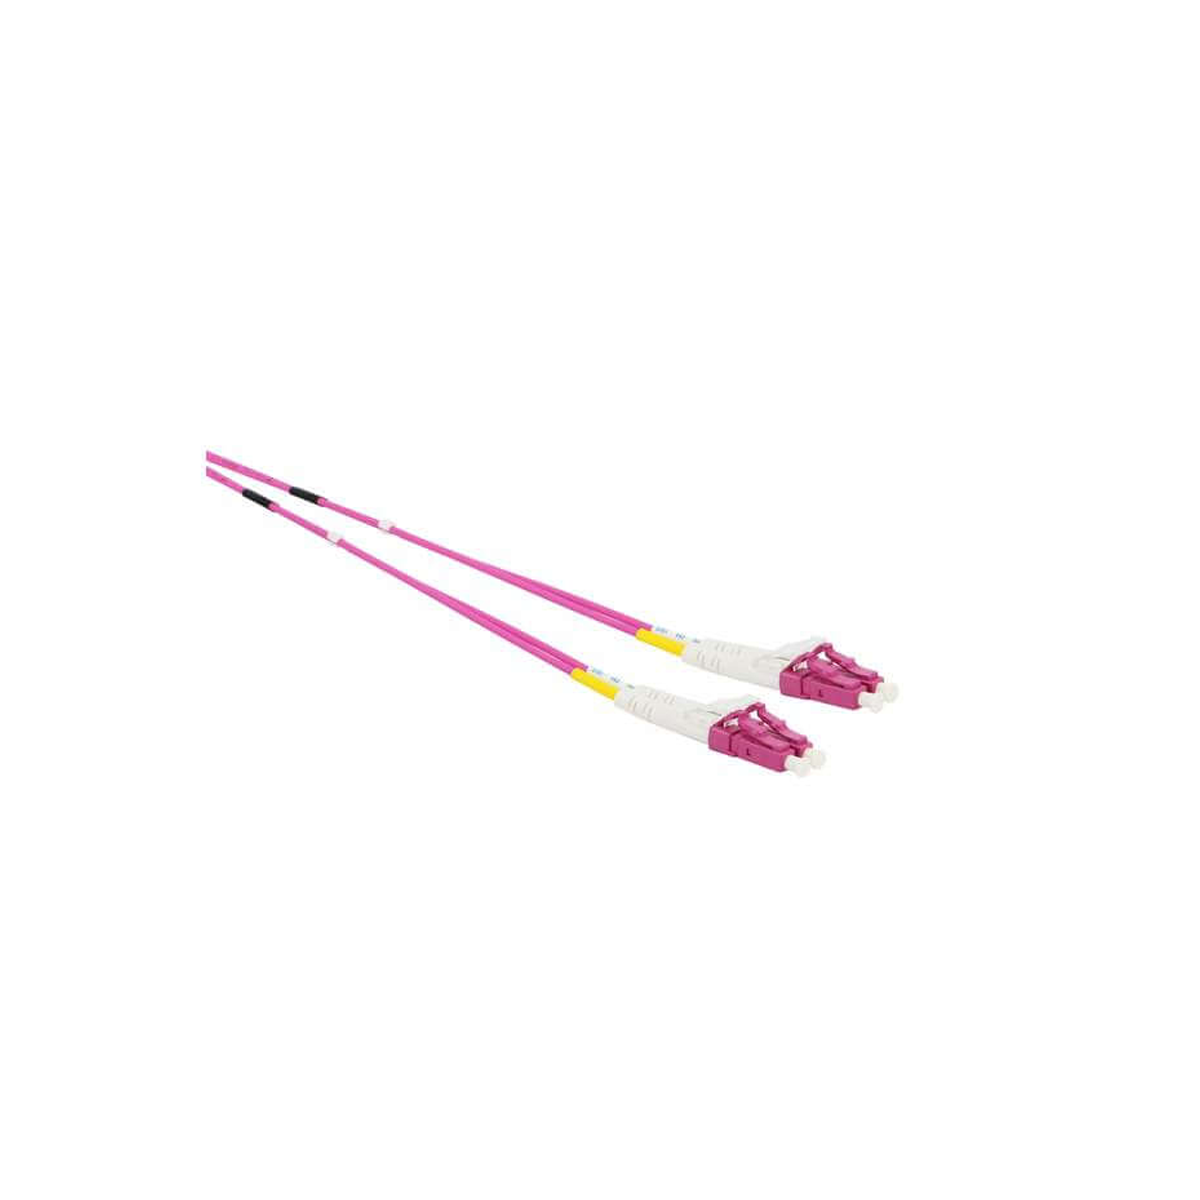 EXCEL OM4 2M LC-LC DUPLEX PATCH LEAD 50/125